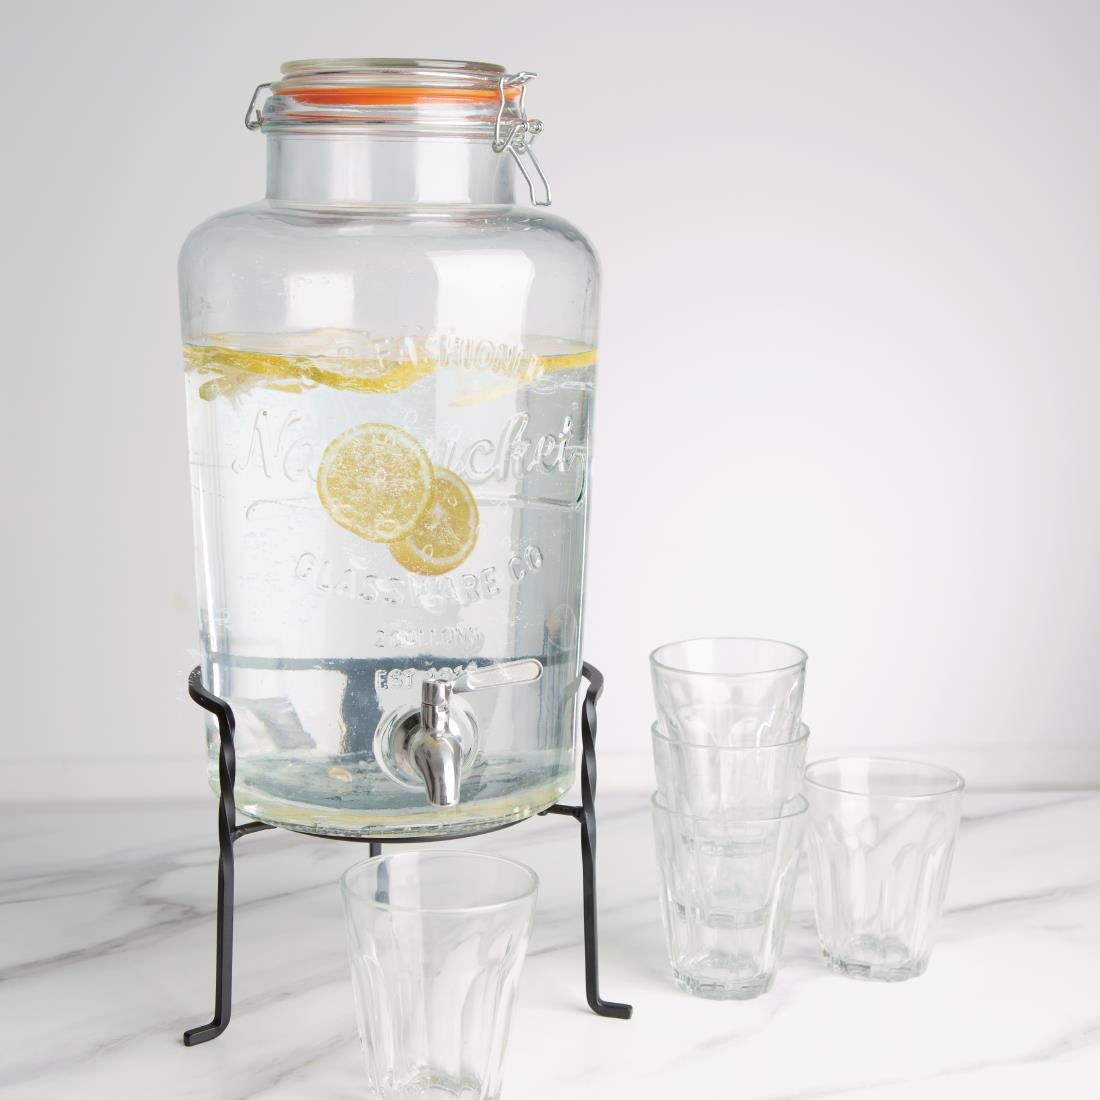 Olympia Nantucket Style Drink Dispenser with Wire Stand